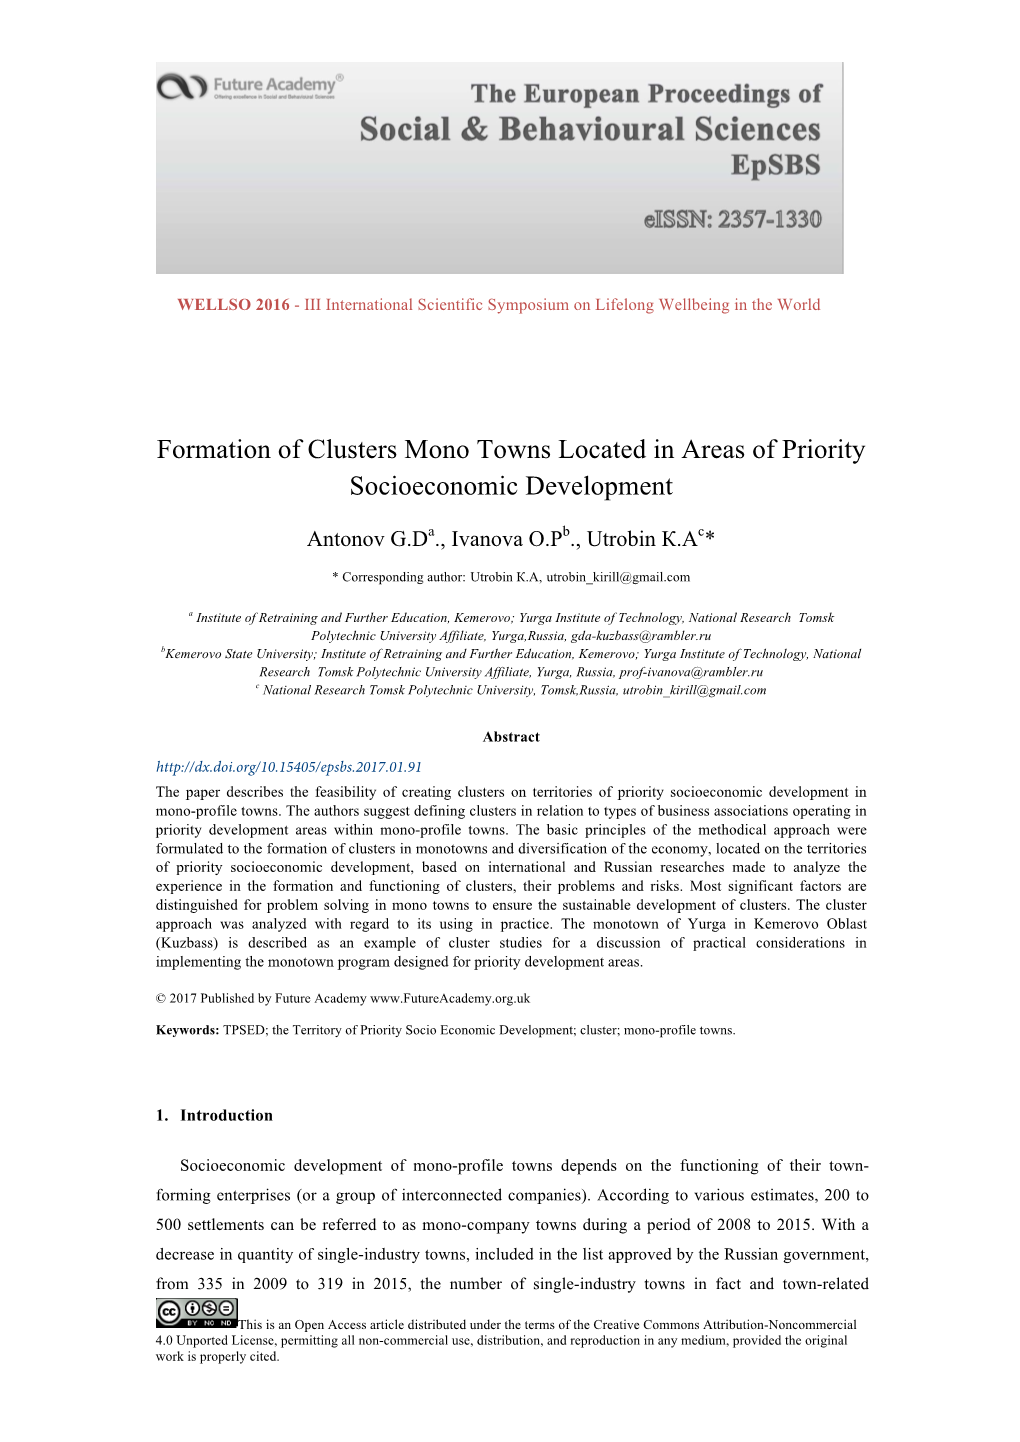 Formation of Clusters Mono Towns Located in Areas of Priority Socioeconomic Development